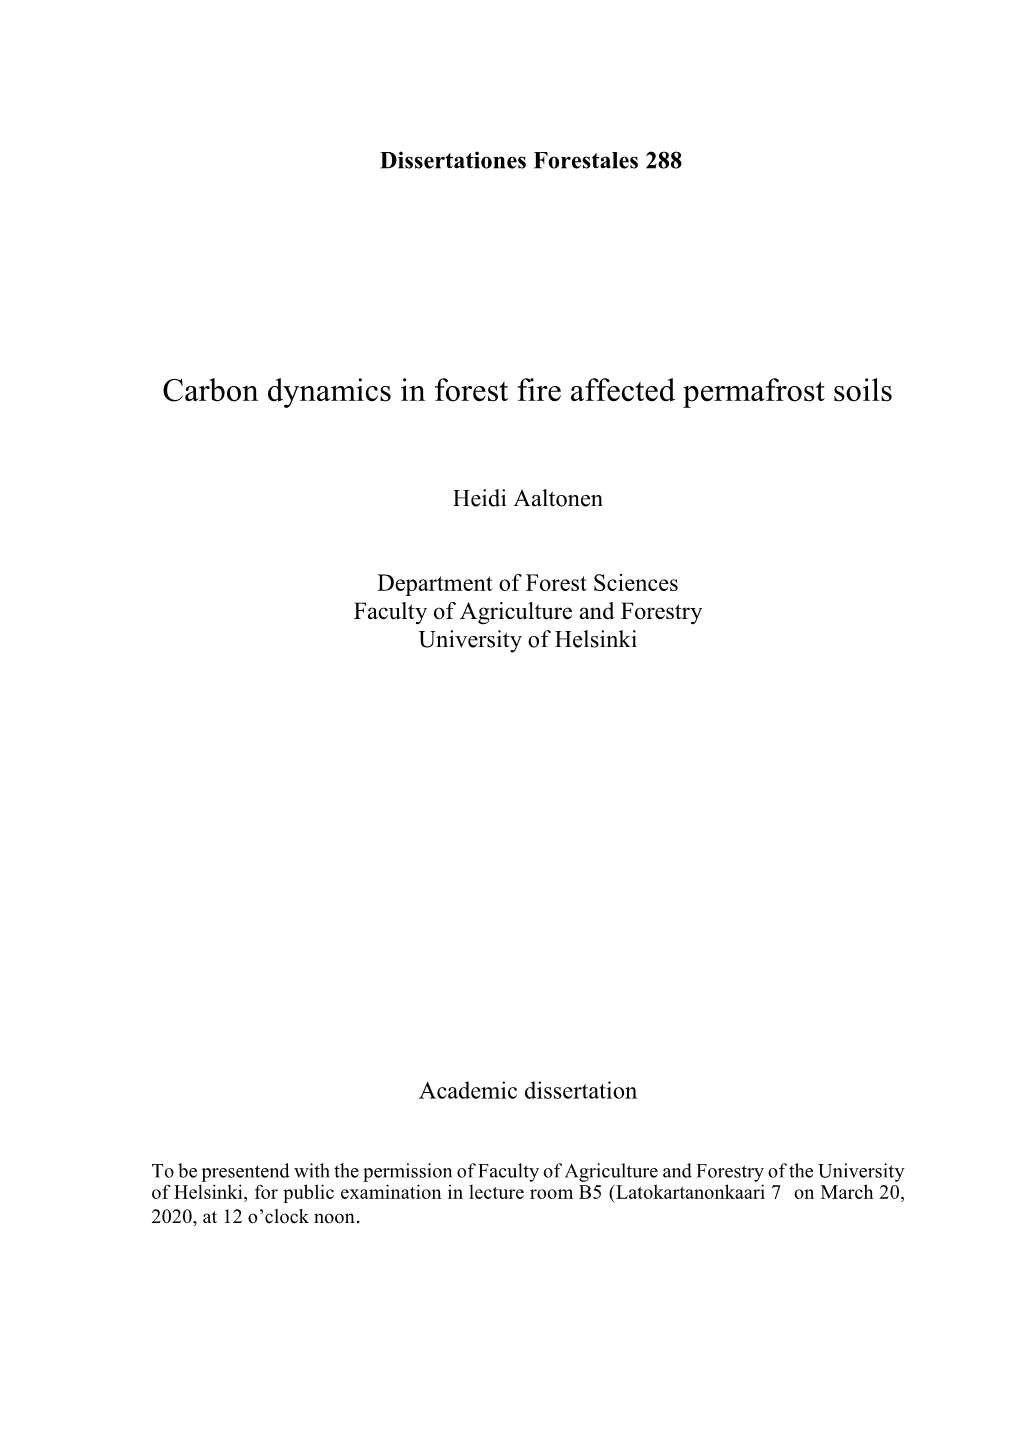 Carbon Dynamics in Forest Fire Affected Permafrost Soils